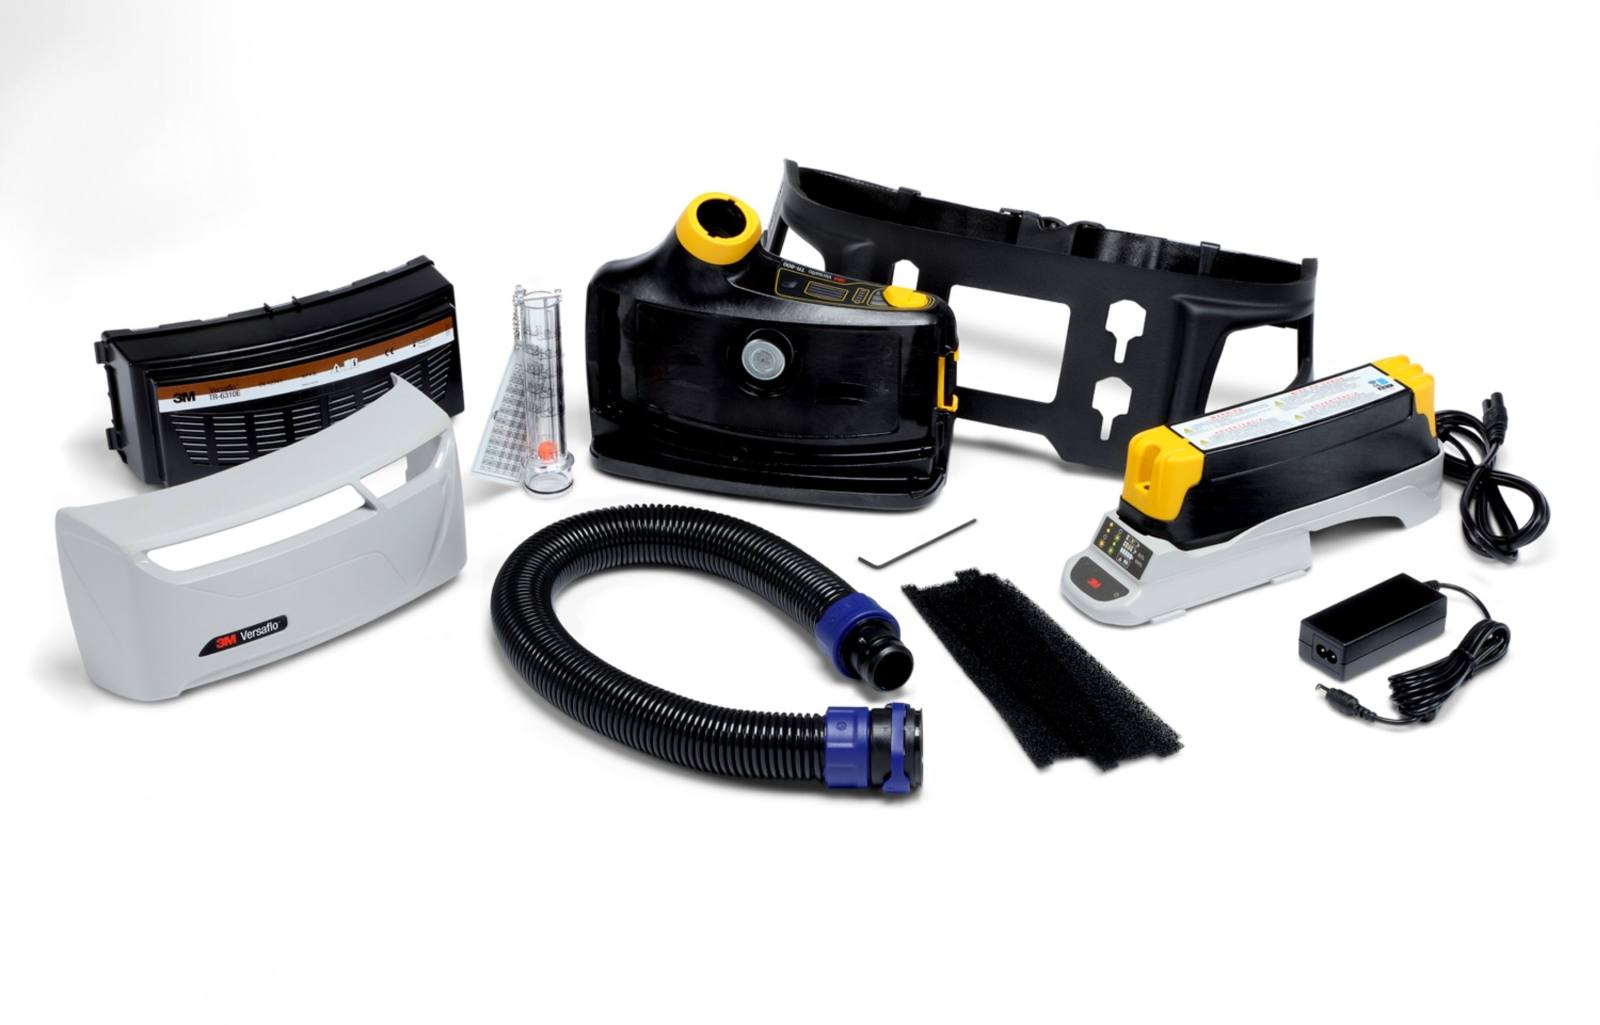 3M TR-819E IS Versaflo starter kit Ex protection with TR-802E blower unit, 1x A2P filter, 2x pre-filters, standard belt, 1x battery, battery mounting tool, charger, BT-30 adjustable air hose, air flow indicator